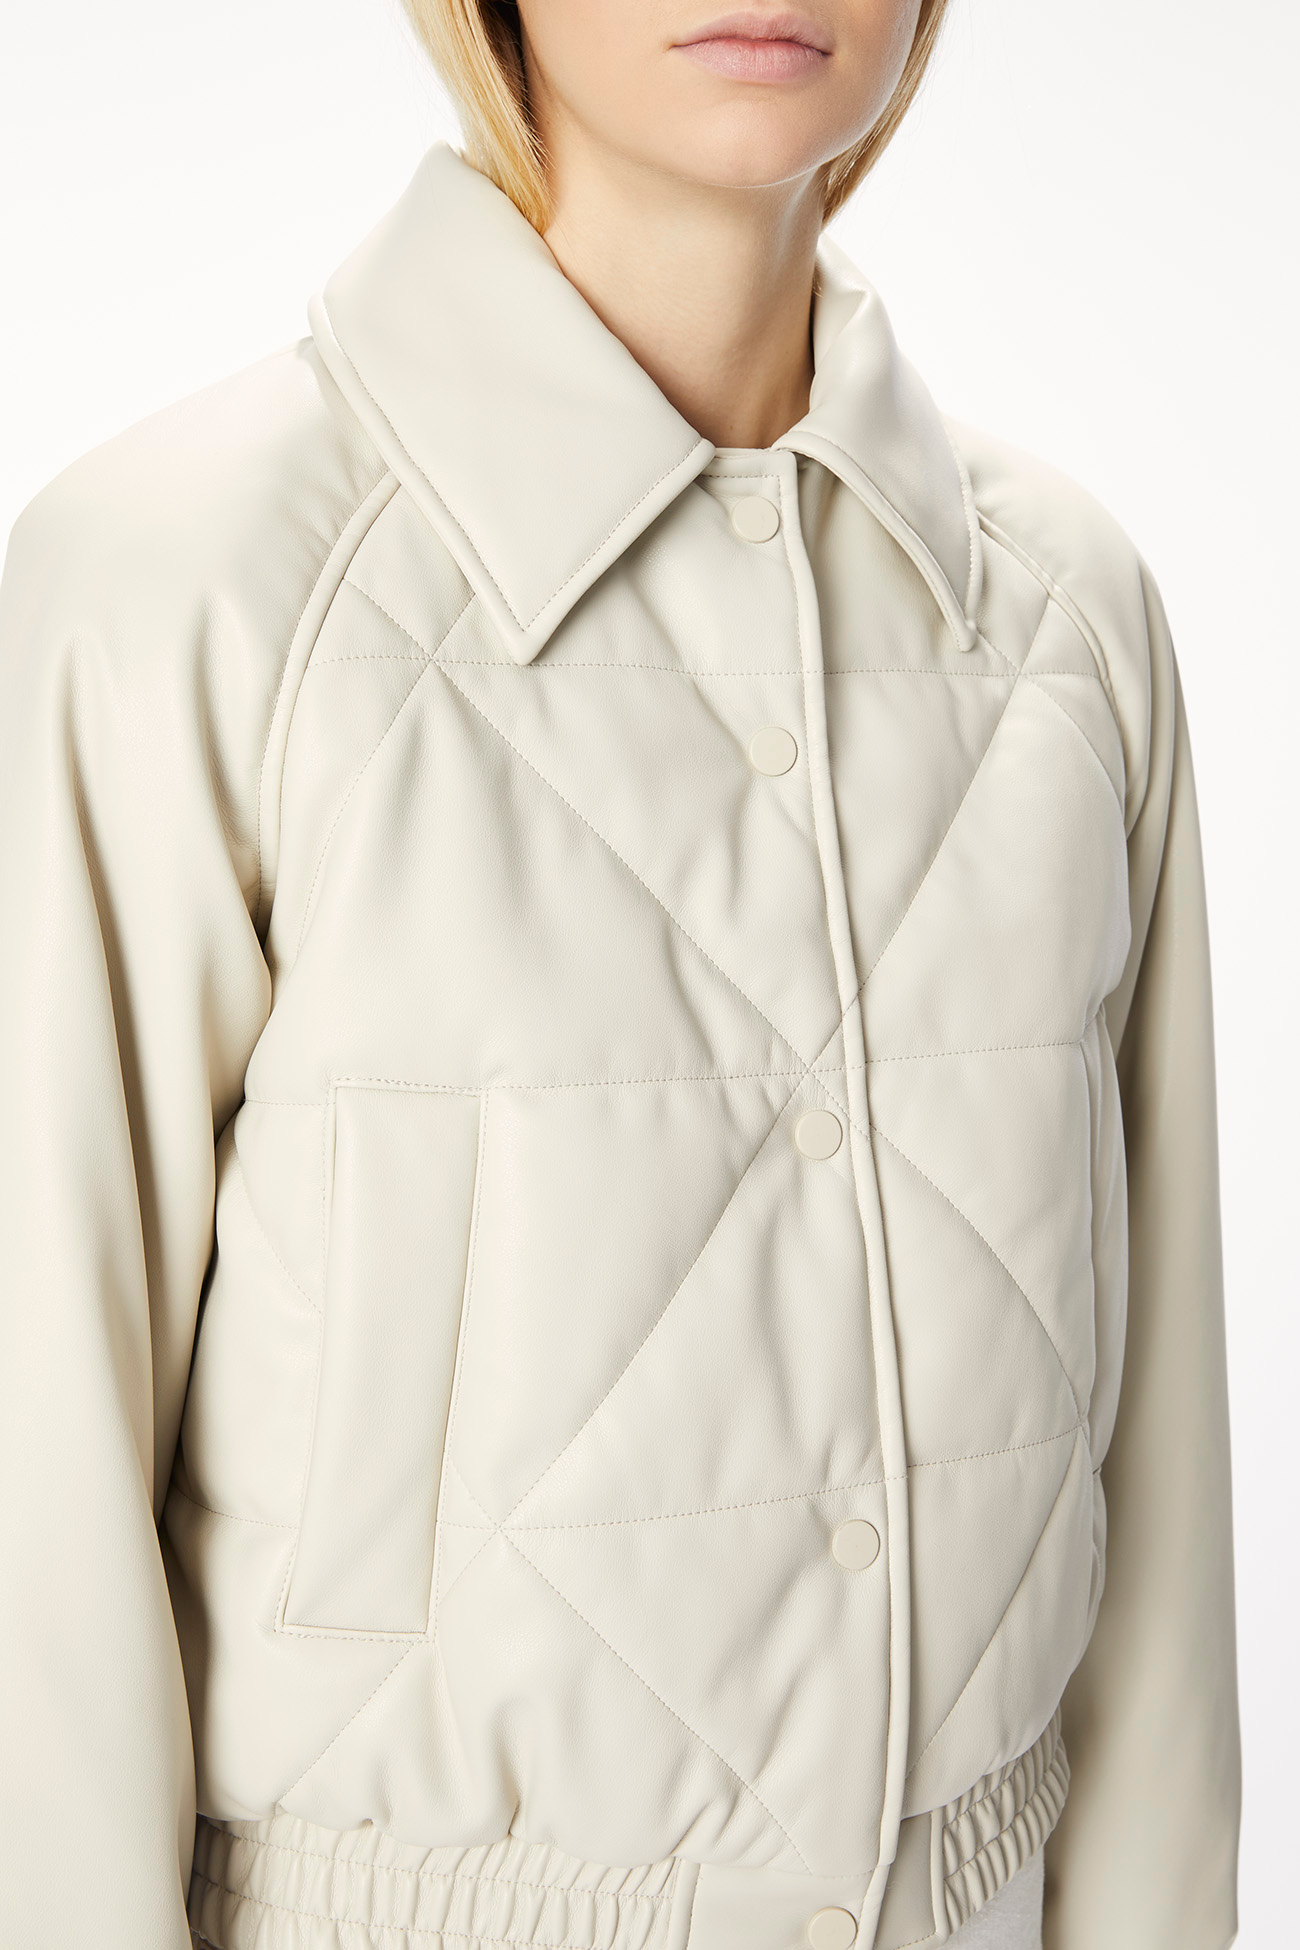 JACKET 9201 MADE IN ECO LEATHER - NATURAL WHITE - OOF WEAR